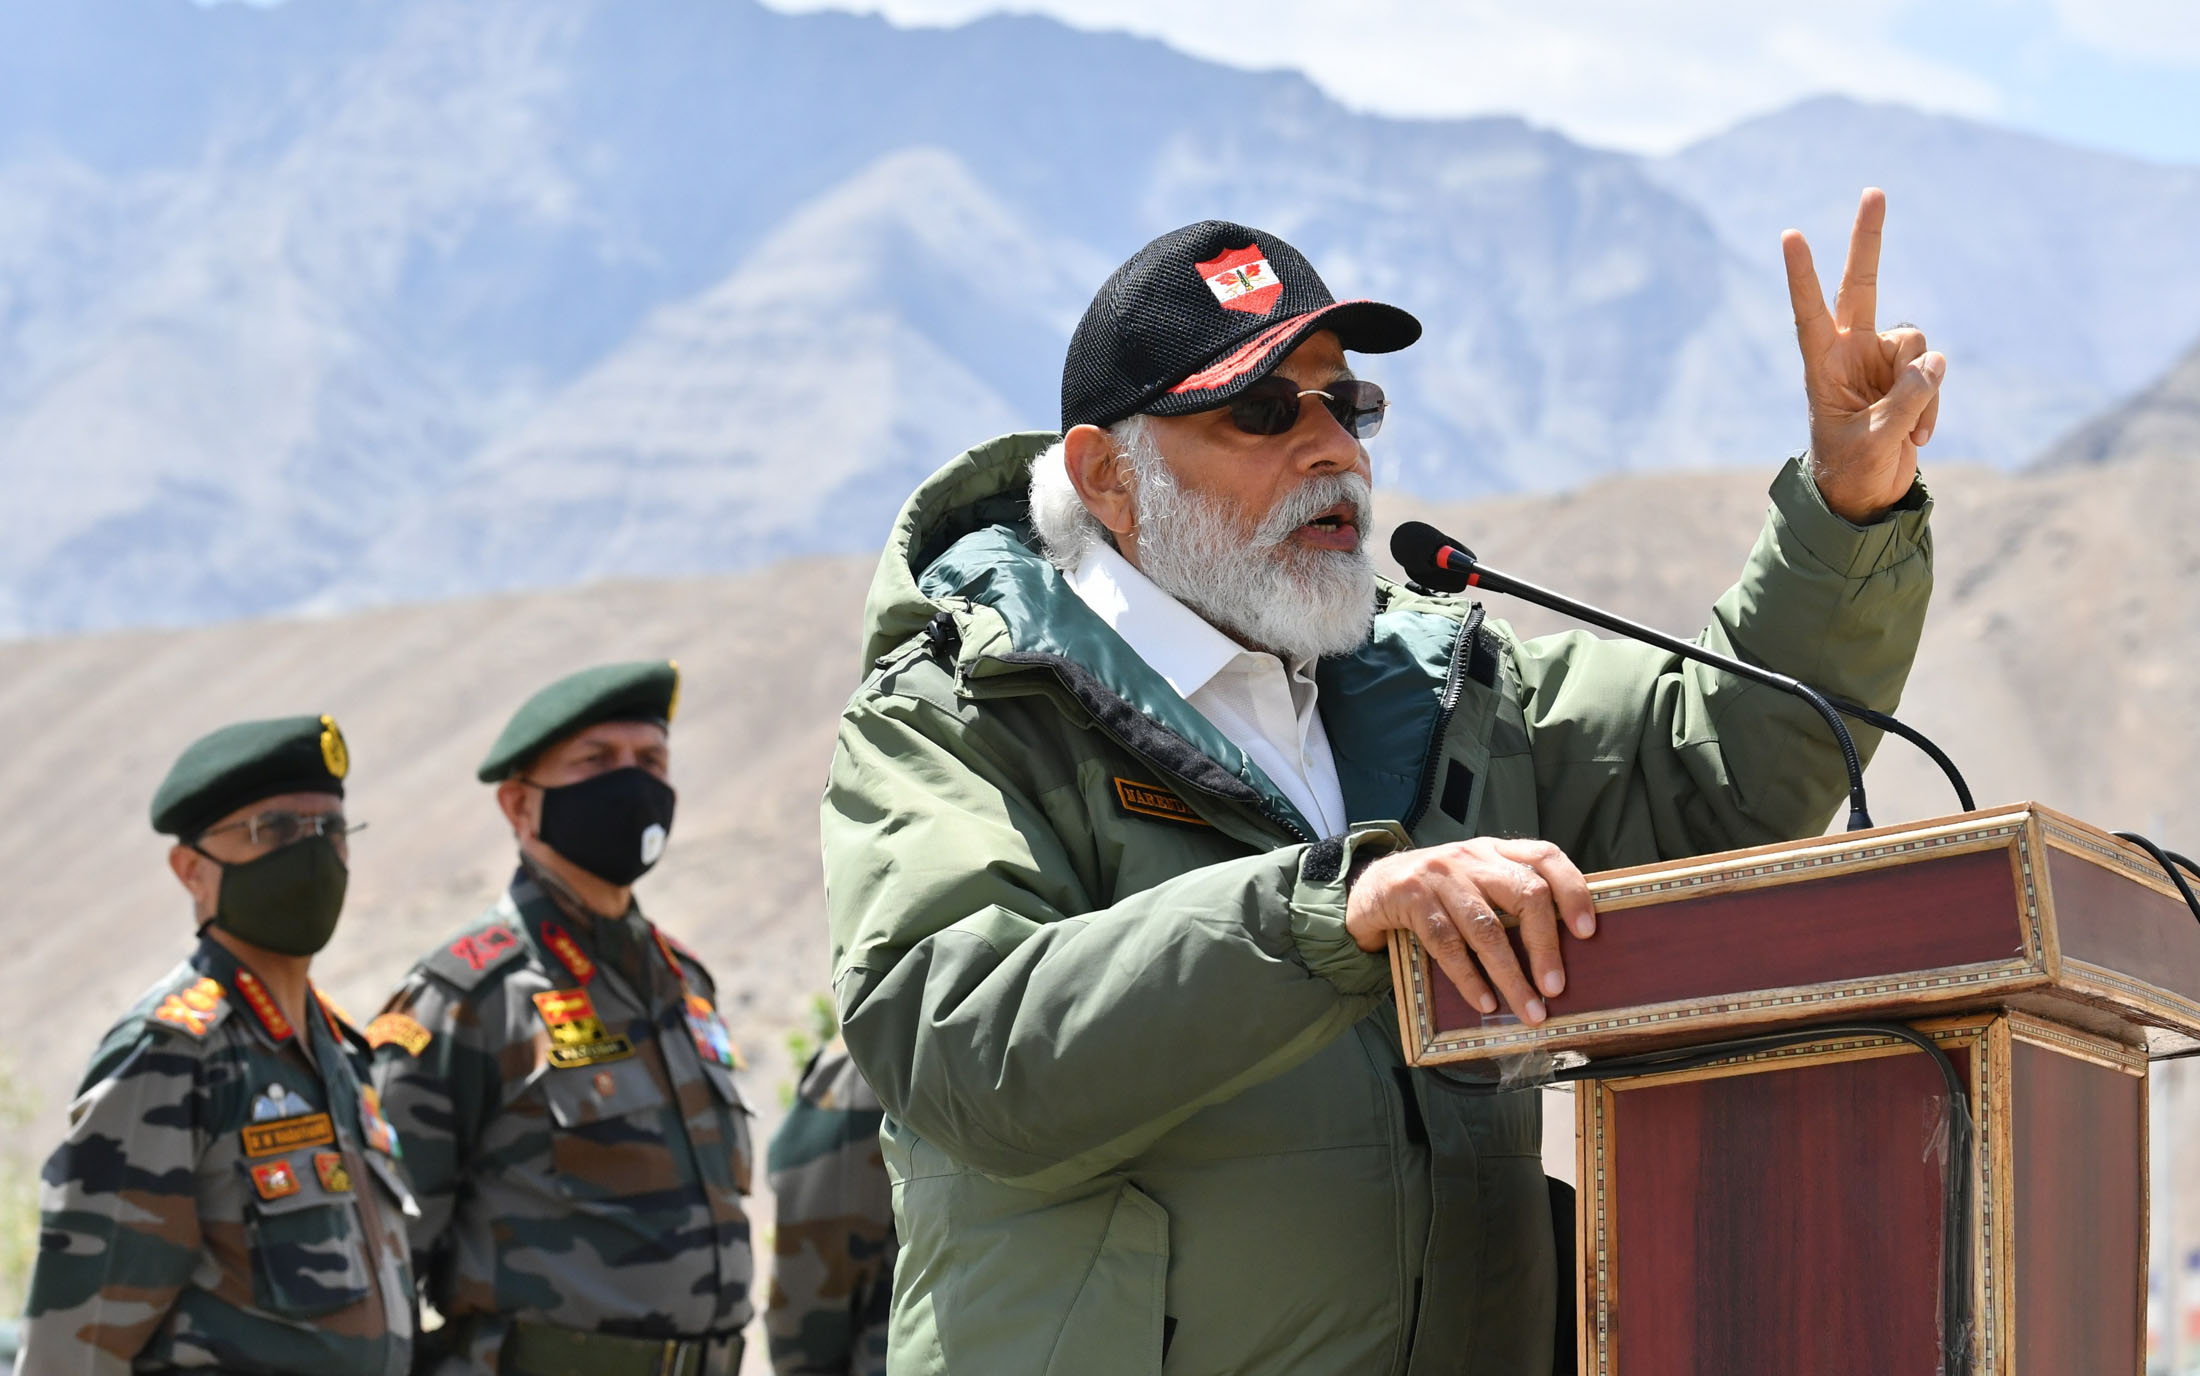 English rendering of PM’s address to Indian Armed Forces in Leh, India